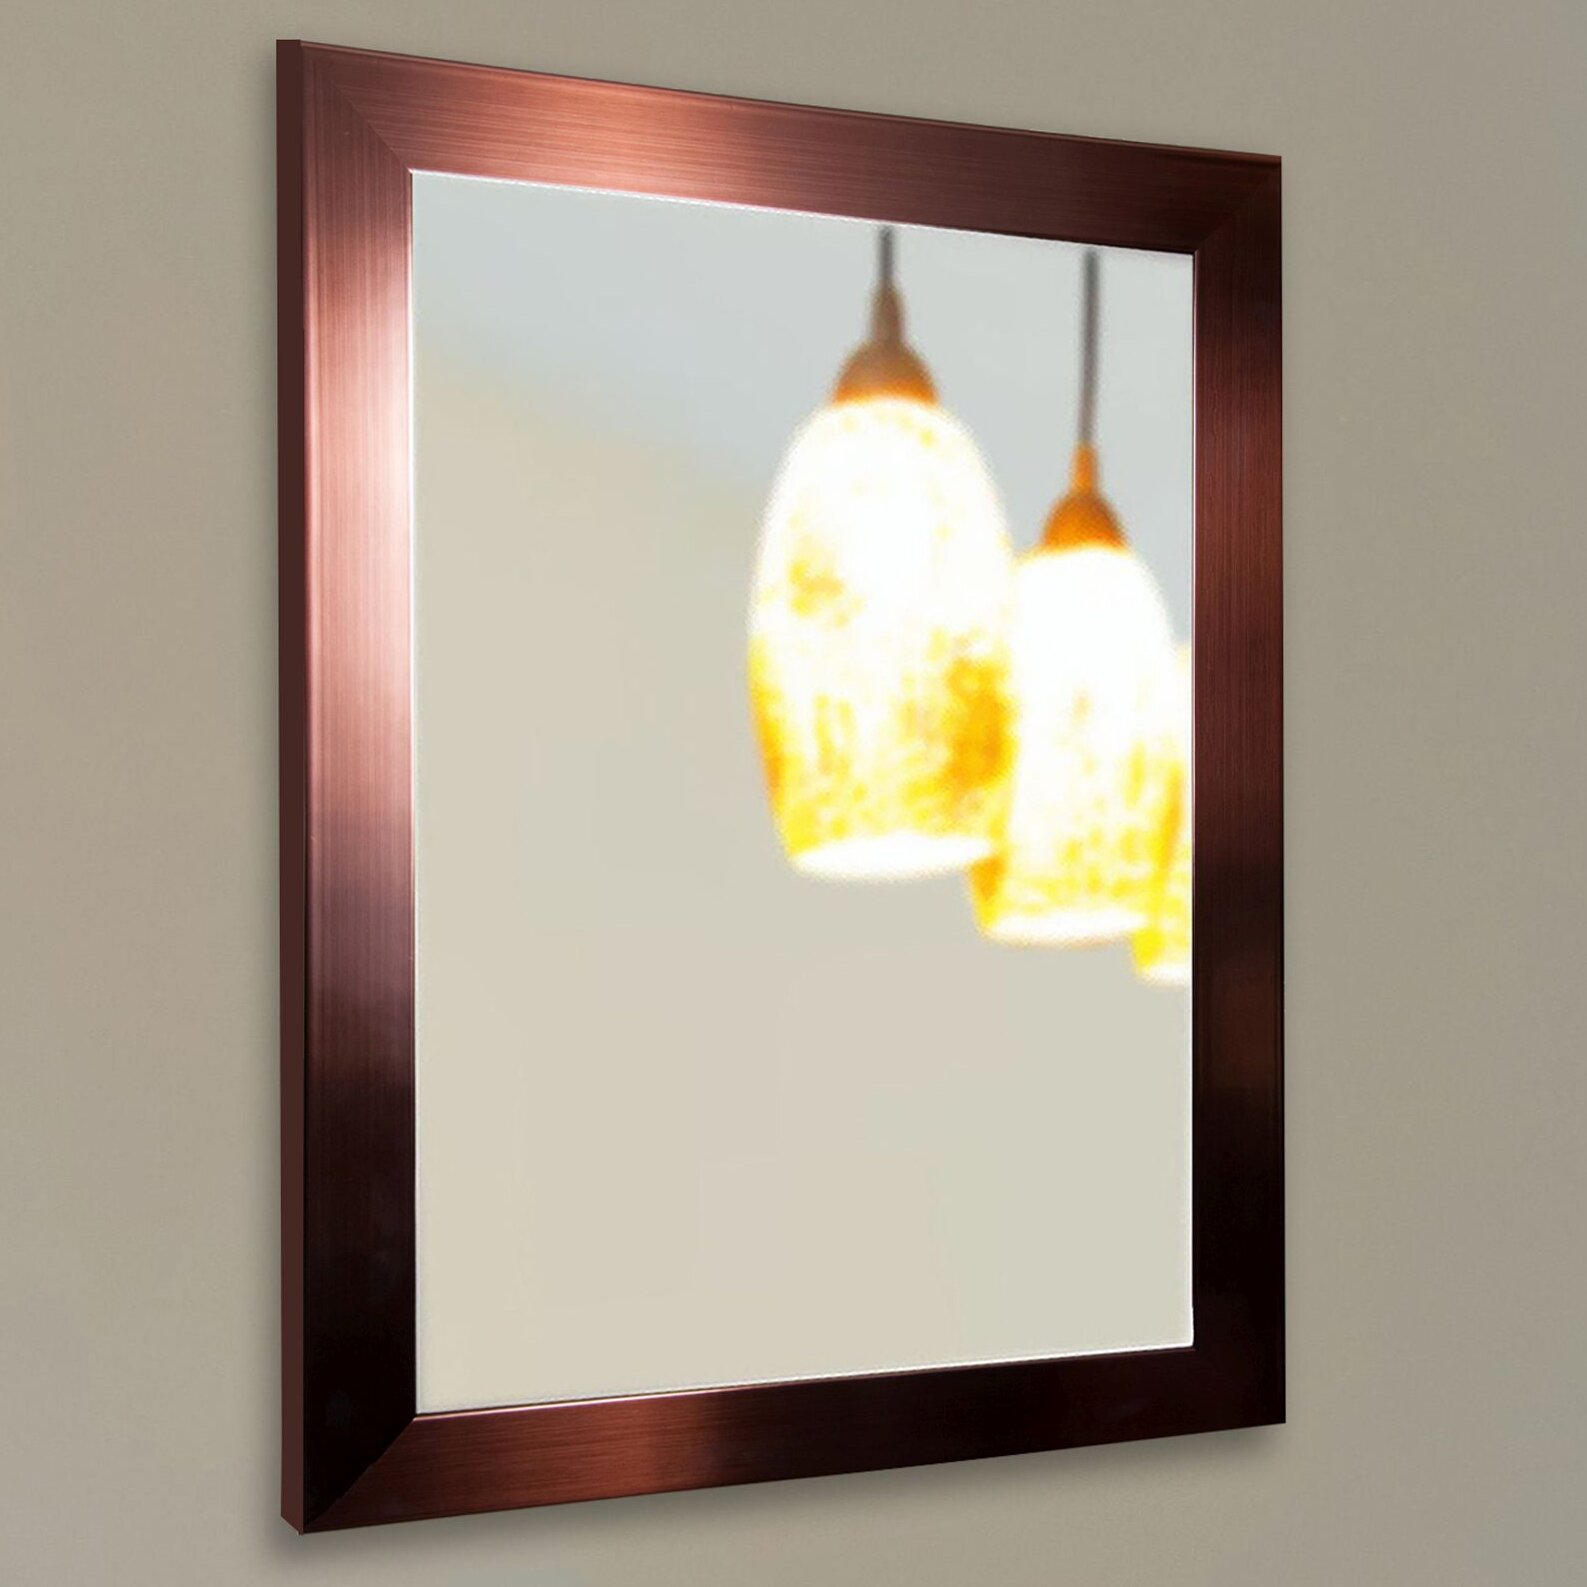 Copper Wall Decorations - Conahan Copper Bronze Accent Mirror